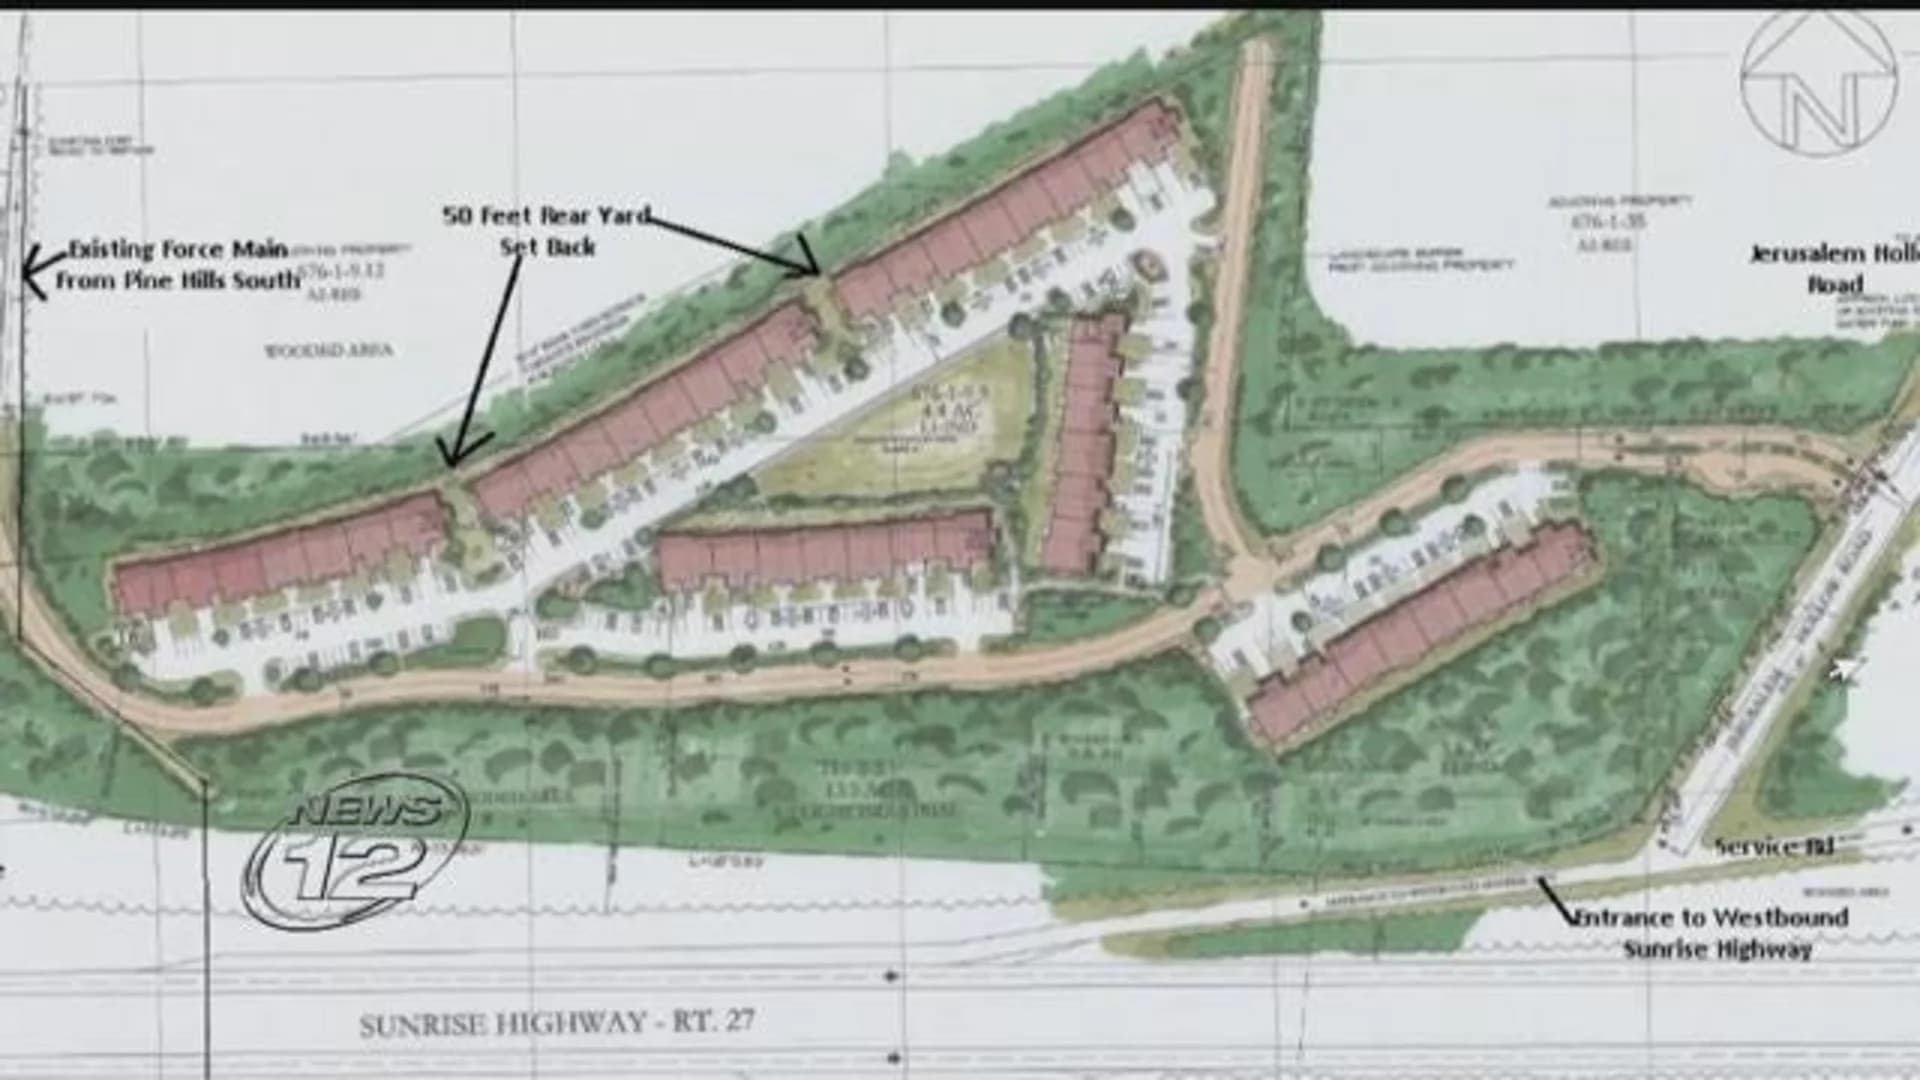 Townhouse proposal for Manorville golf course irks some neighbors